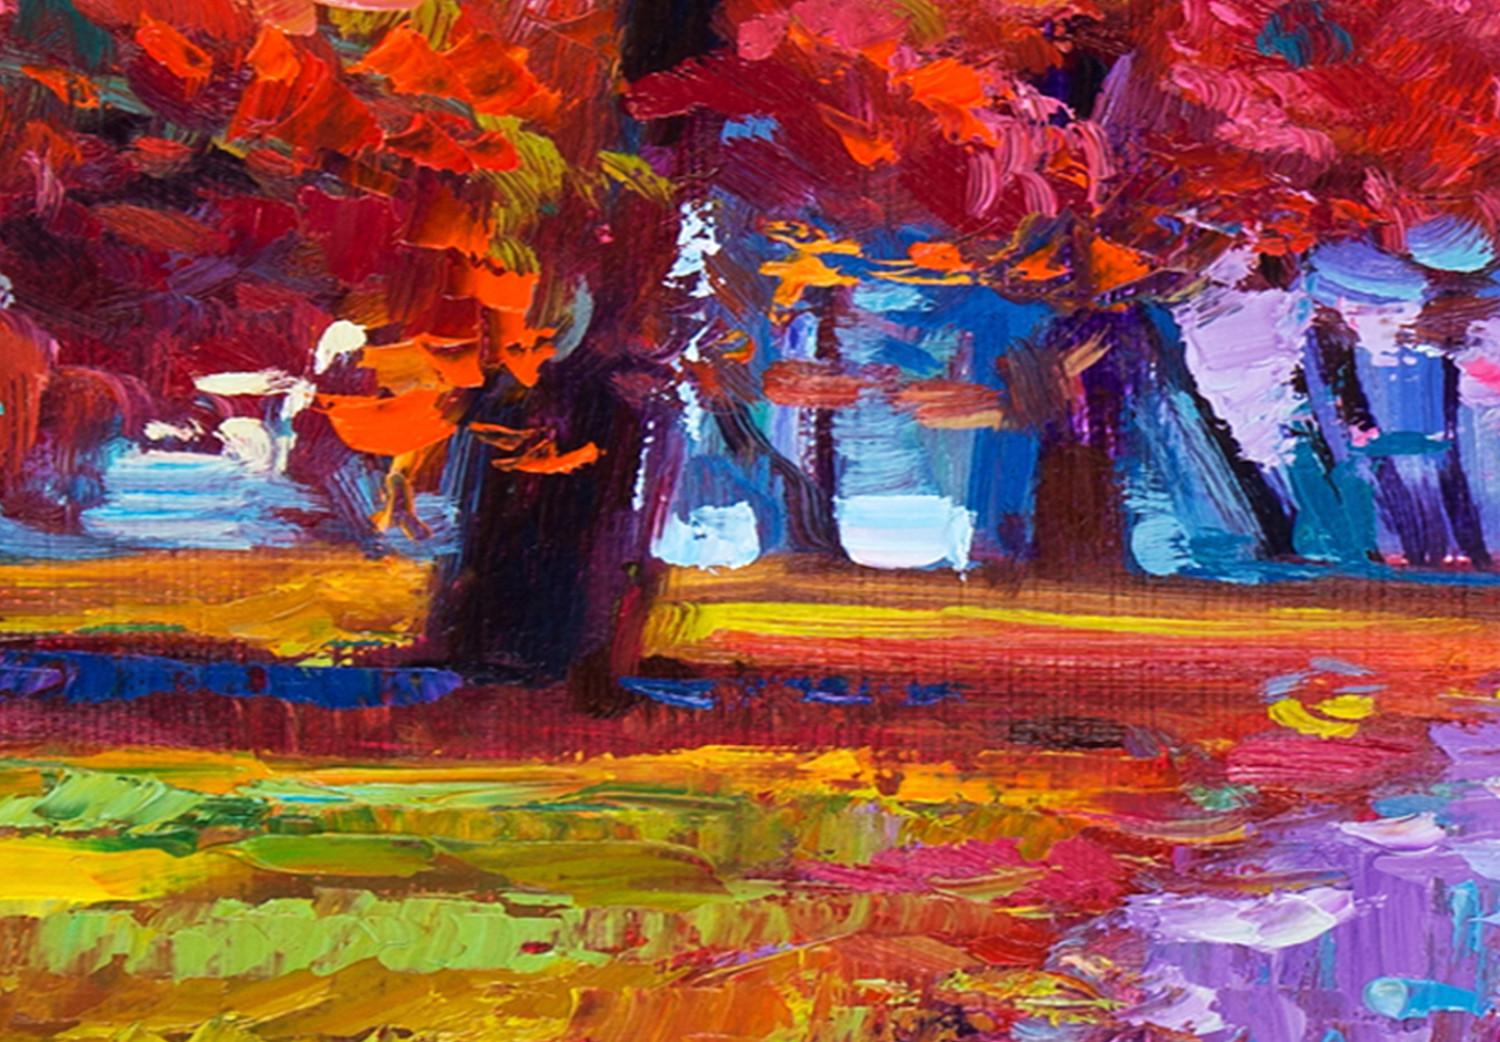 Canvas In the Autumn Park - Painted September Landscape With Colorful Trees